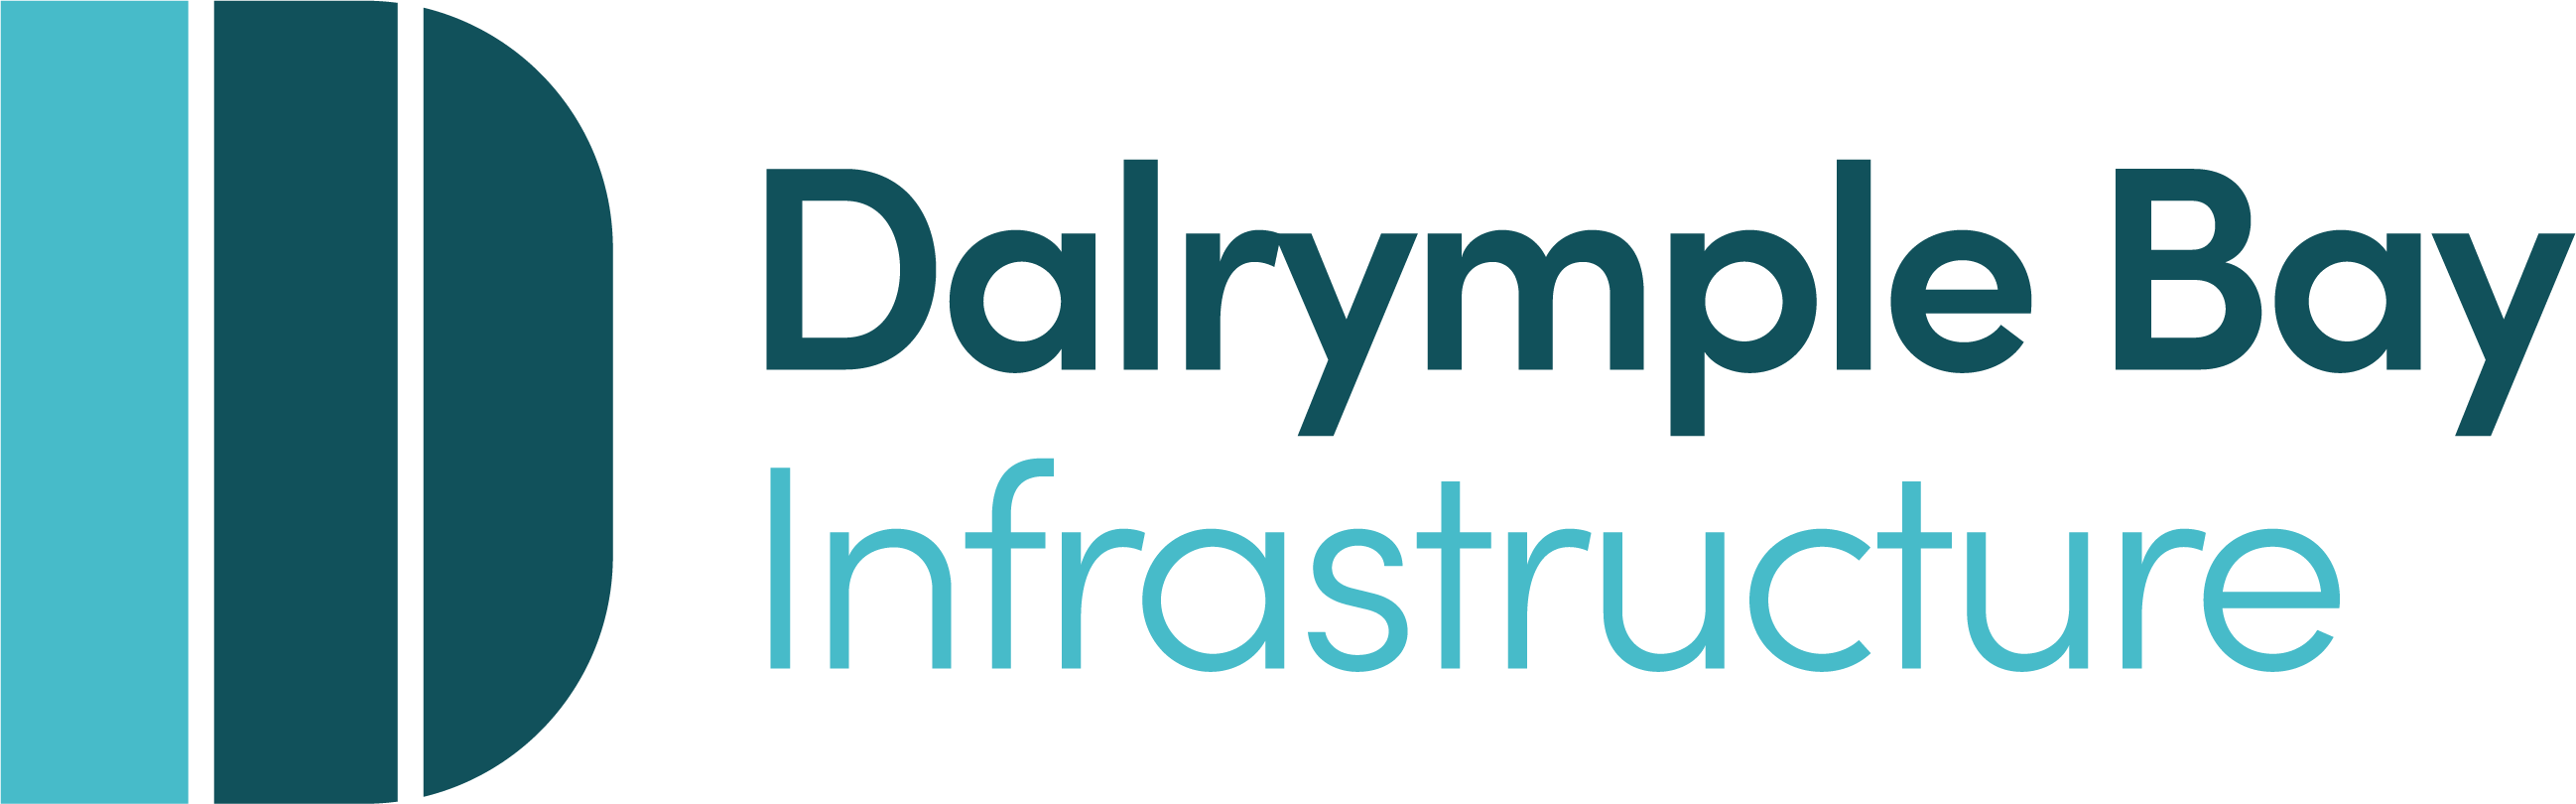 Dalrymple Bay Infrastructure Limited